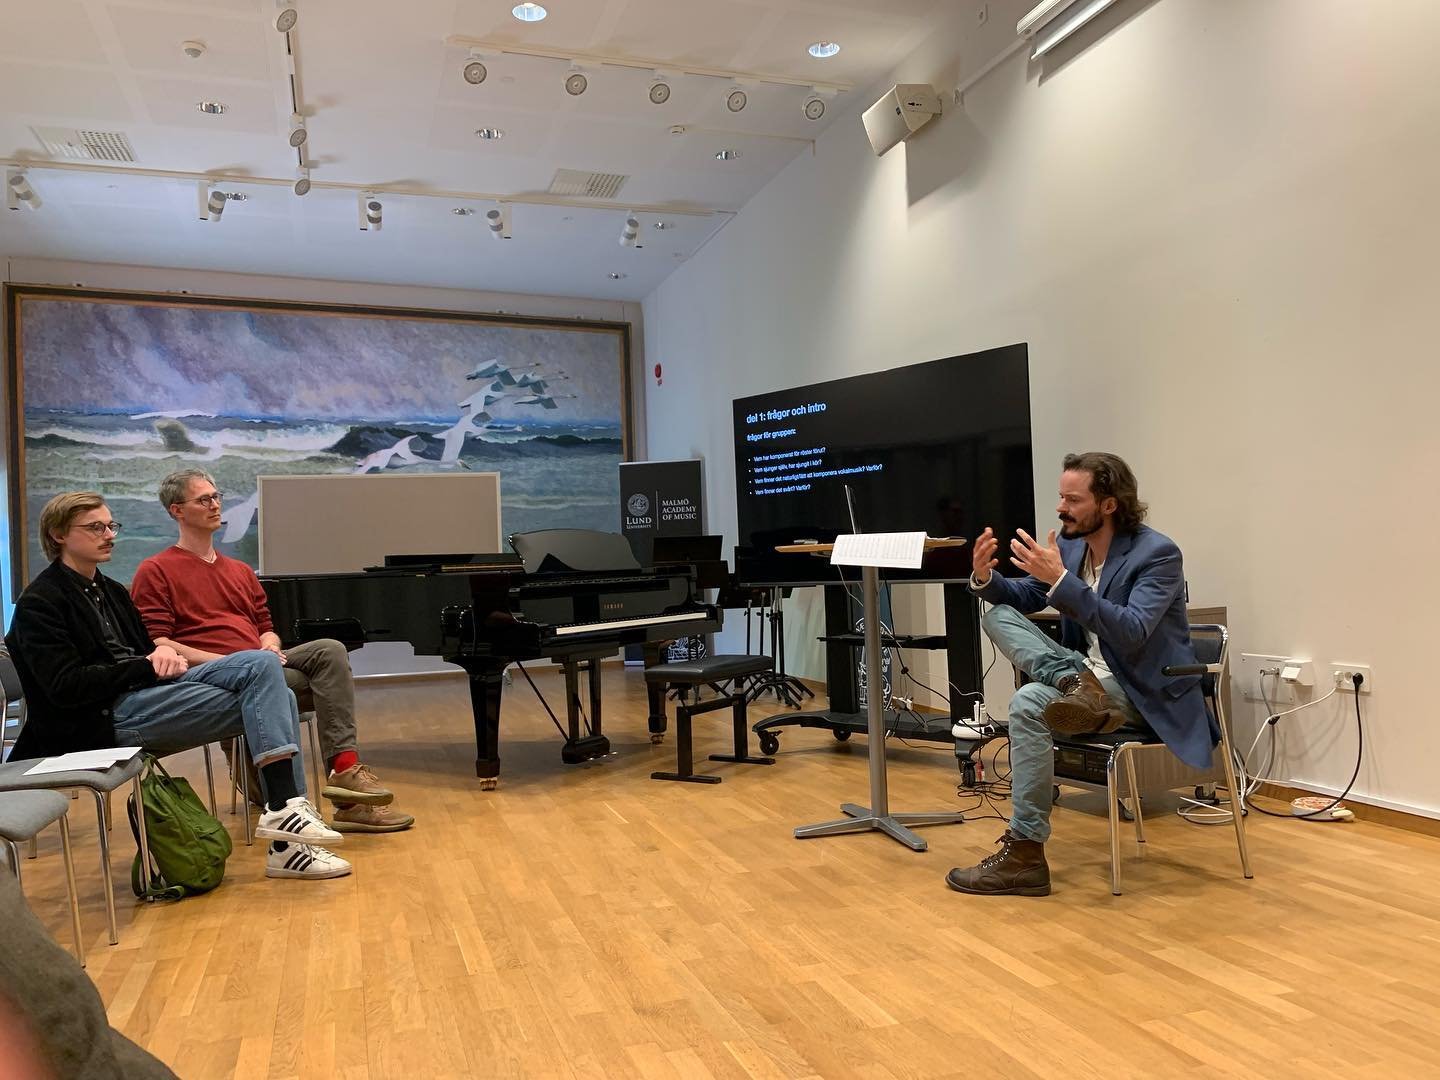 Last Thursday I had the privilege of presenting on choral composition and my choral works for a group of composers and choral aficionados at @mhm.lu.se and @korcentrumsyd . An original Bruno Liljefors was an inspiring backdrop for this hunter-compose